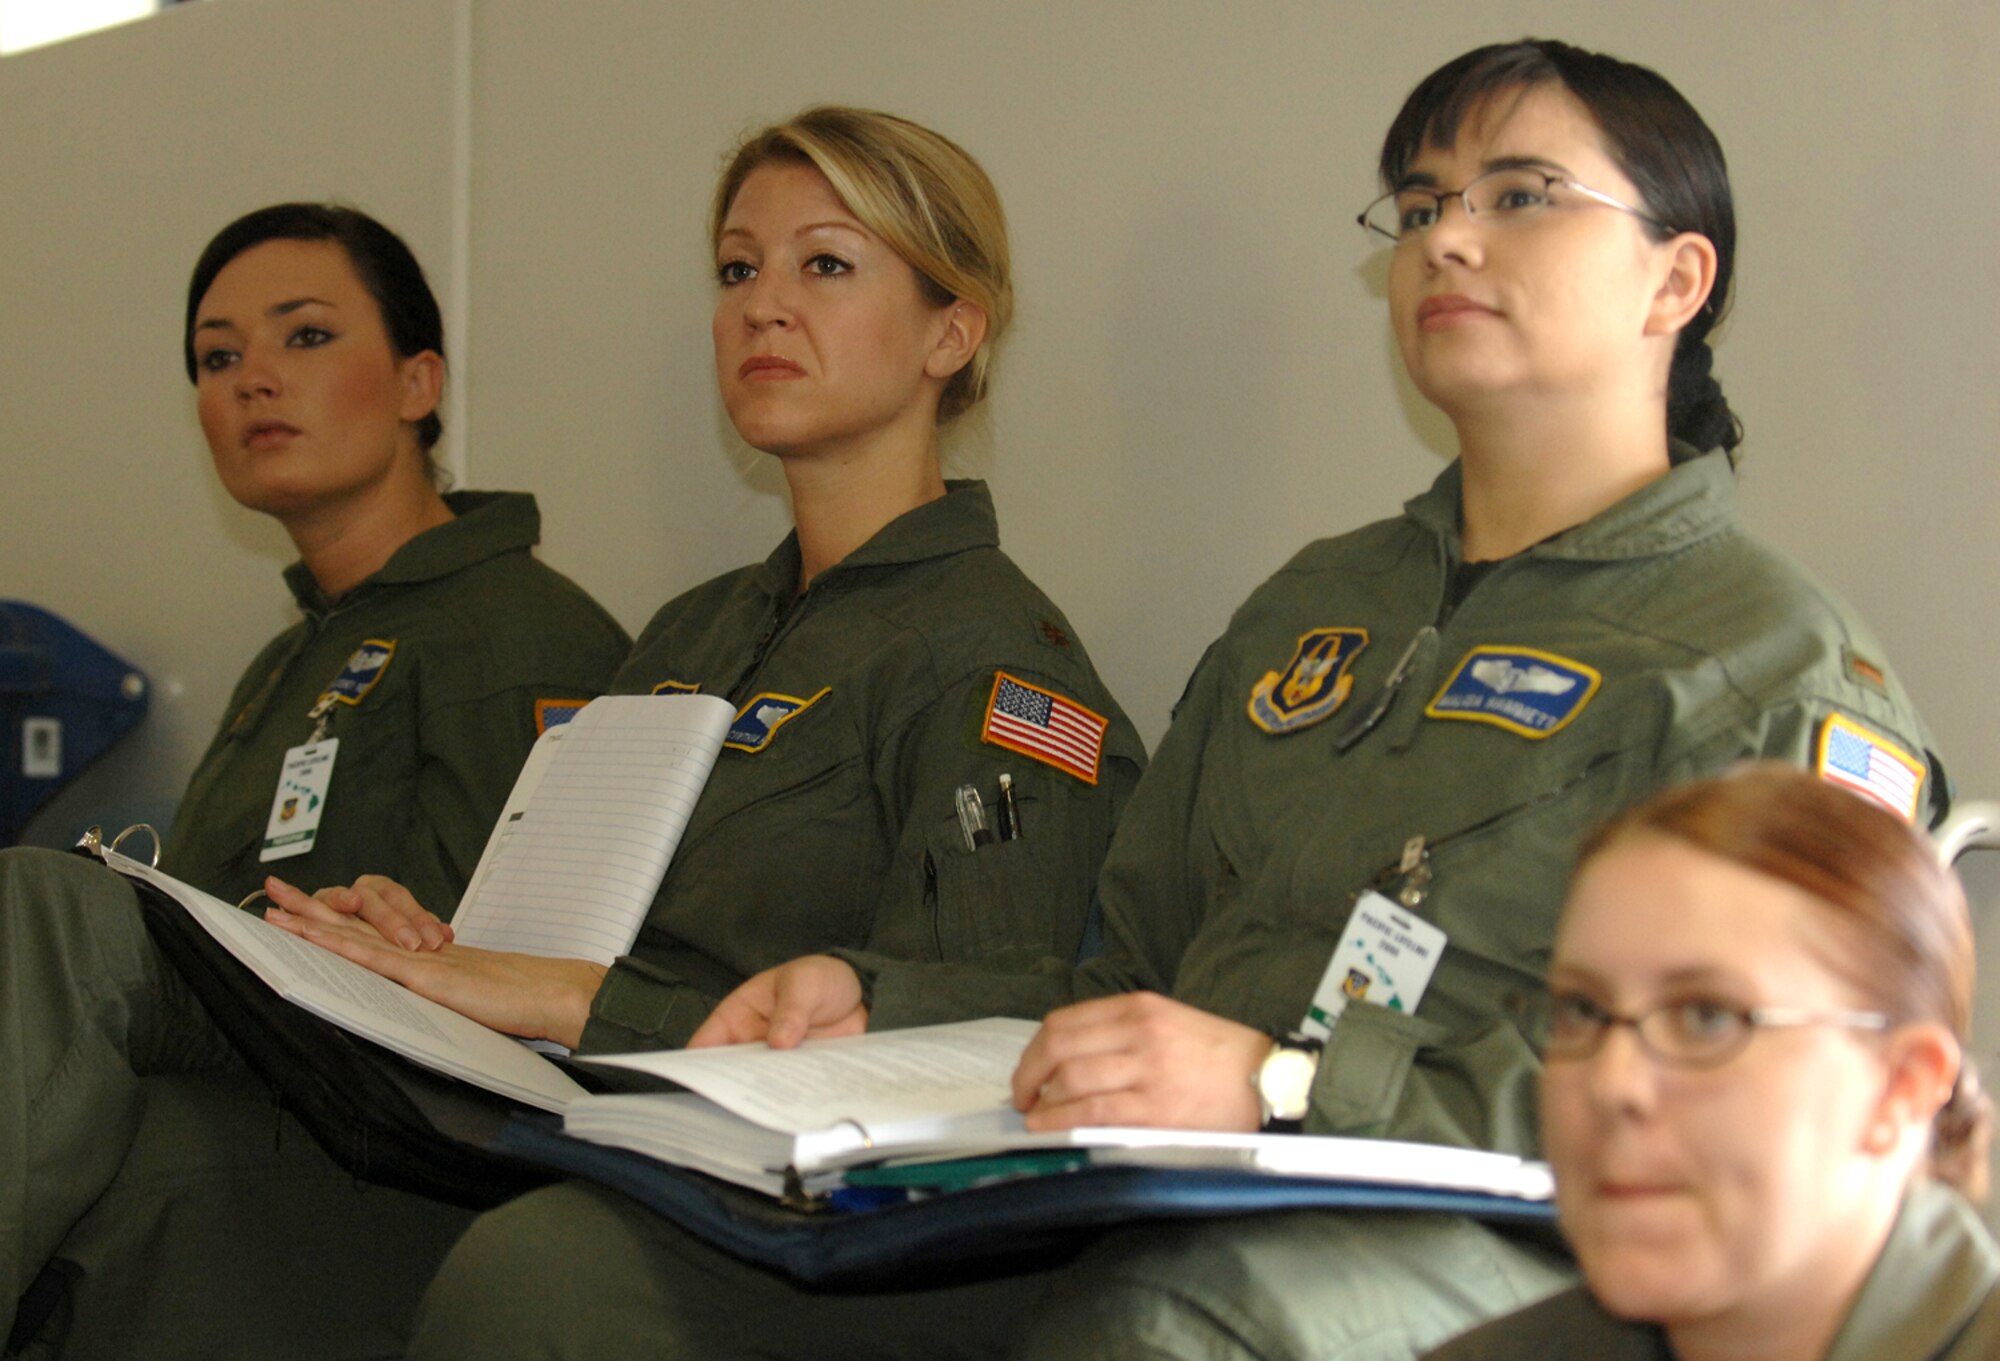 Senior Airman Sydney Reed, (left to right) Maj. Cynthia Hathaway, 2nd Lt. Malissa Hammet, and Staff Sgt. Allison Massey, 446th Aeromedical Evacuation Squadron, McChord Air Force Base, Wash., listen to a briefer during a training session in the first week of the Pacific Lifeline exercise.  Pacific Lifeline was a humanitarian assistance disaster response exercise that took place on three Hawaiian Islands Jan. 26 to Feb. 9.  More than 900 Department of Defense personnel participated, including 145 Air Force Reserve Airmen from McChord. (U.S. Air Force photo) 